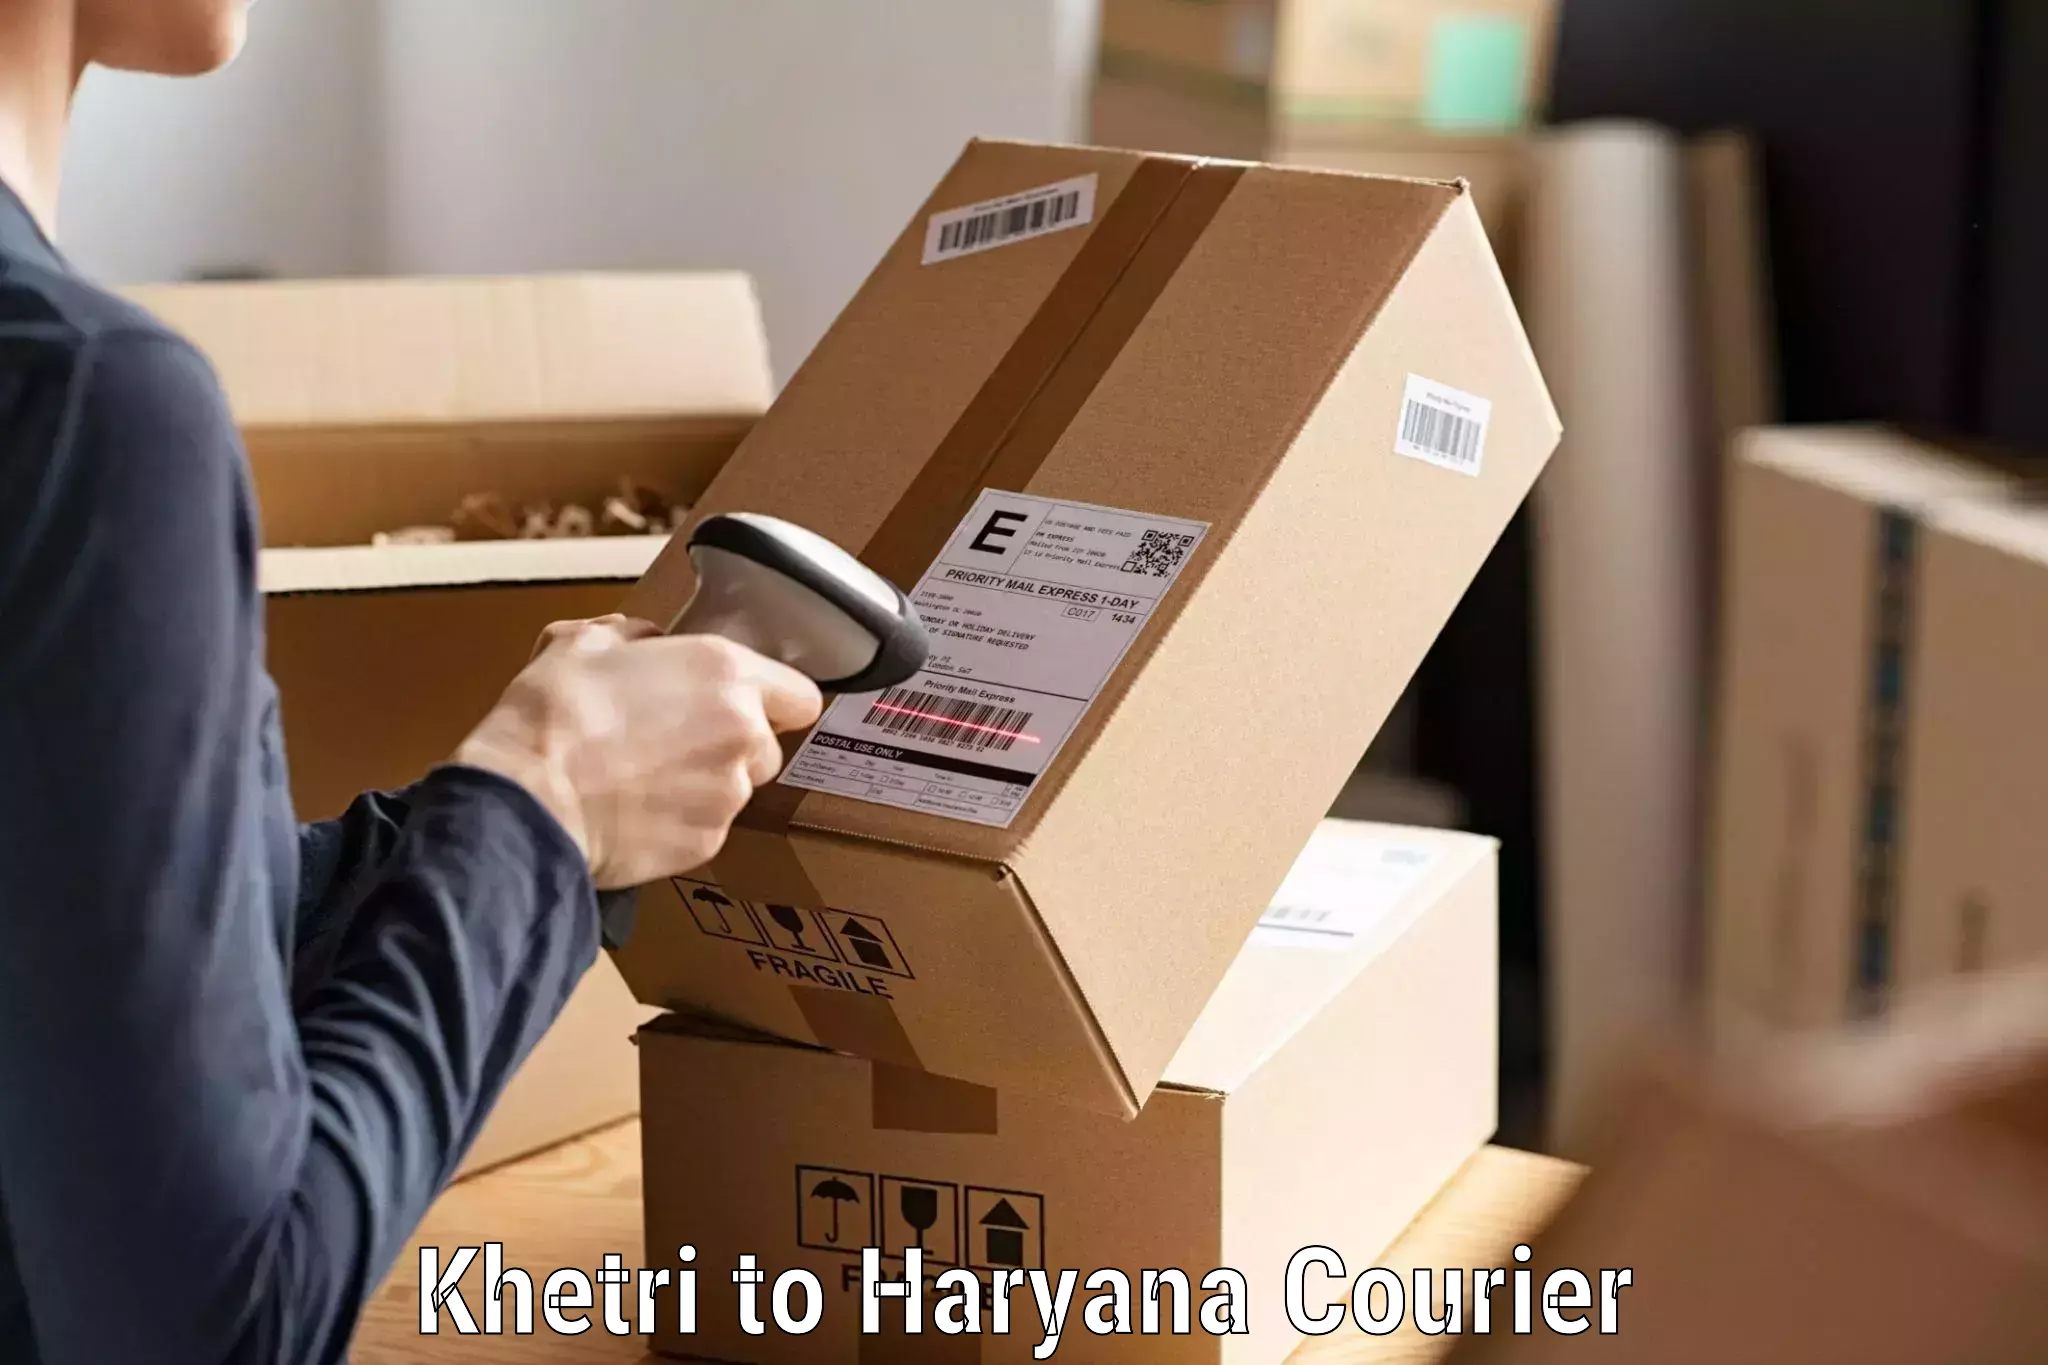 24/7 courier service Khetri to Panipat